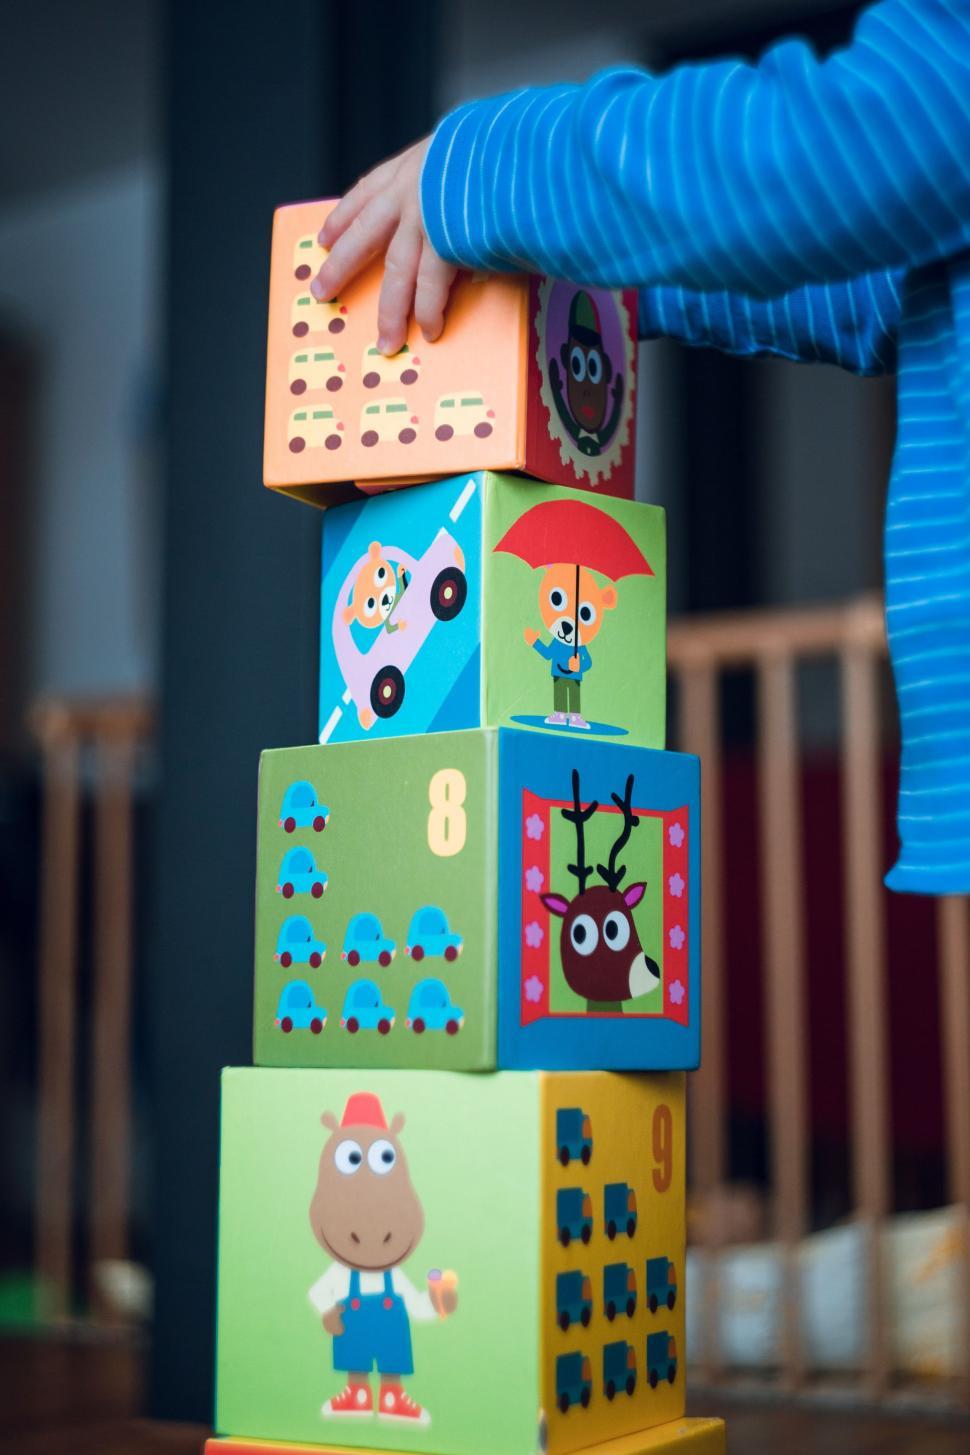 Free Image of Child Playing With Tower of Blocks 